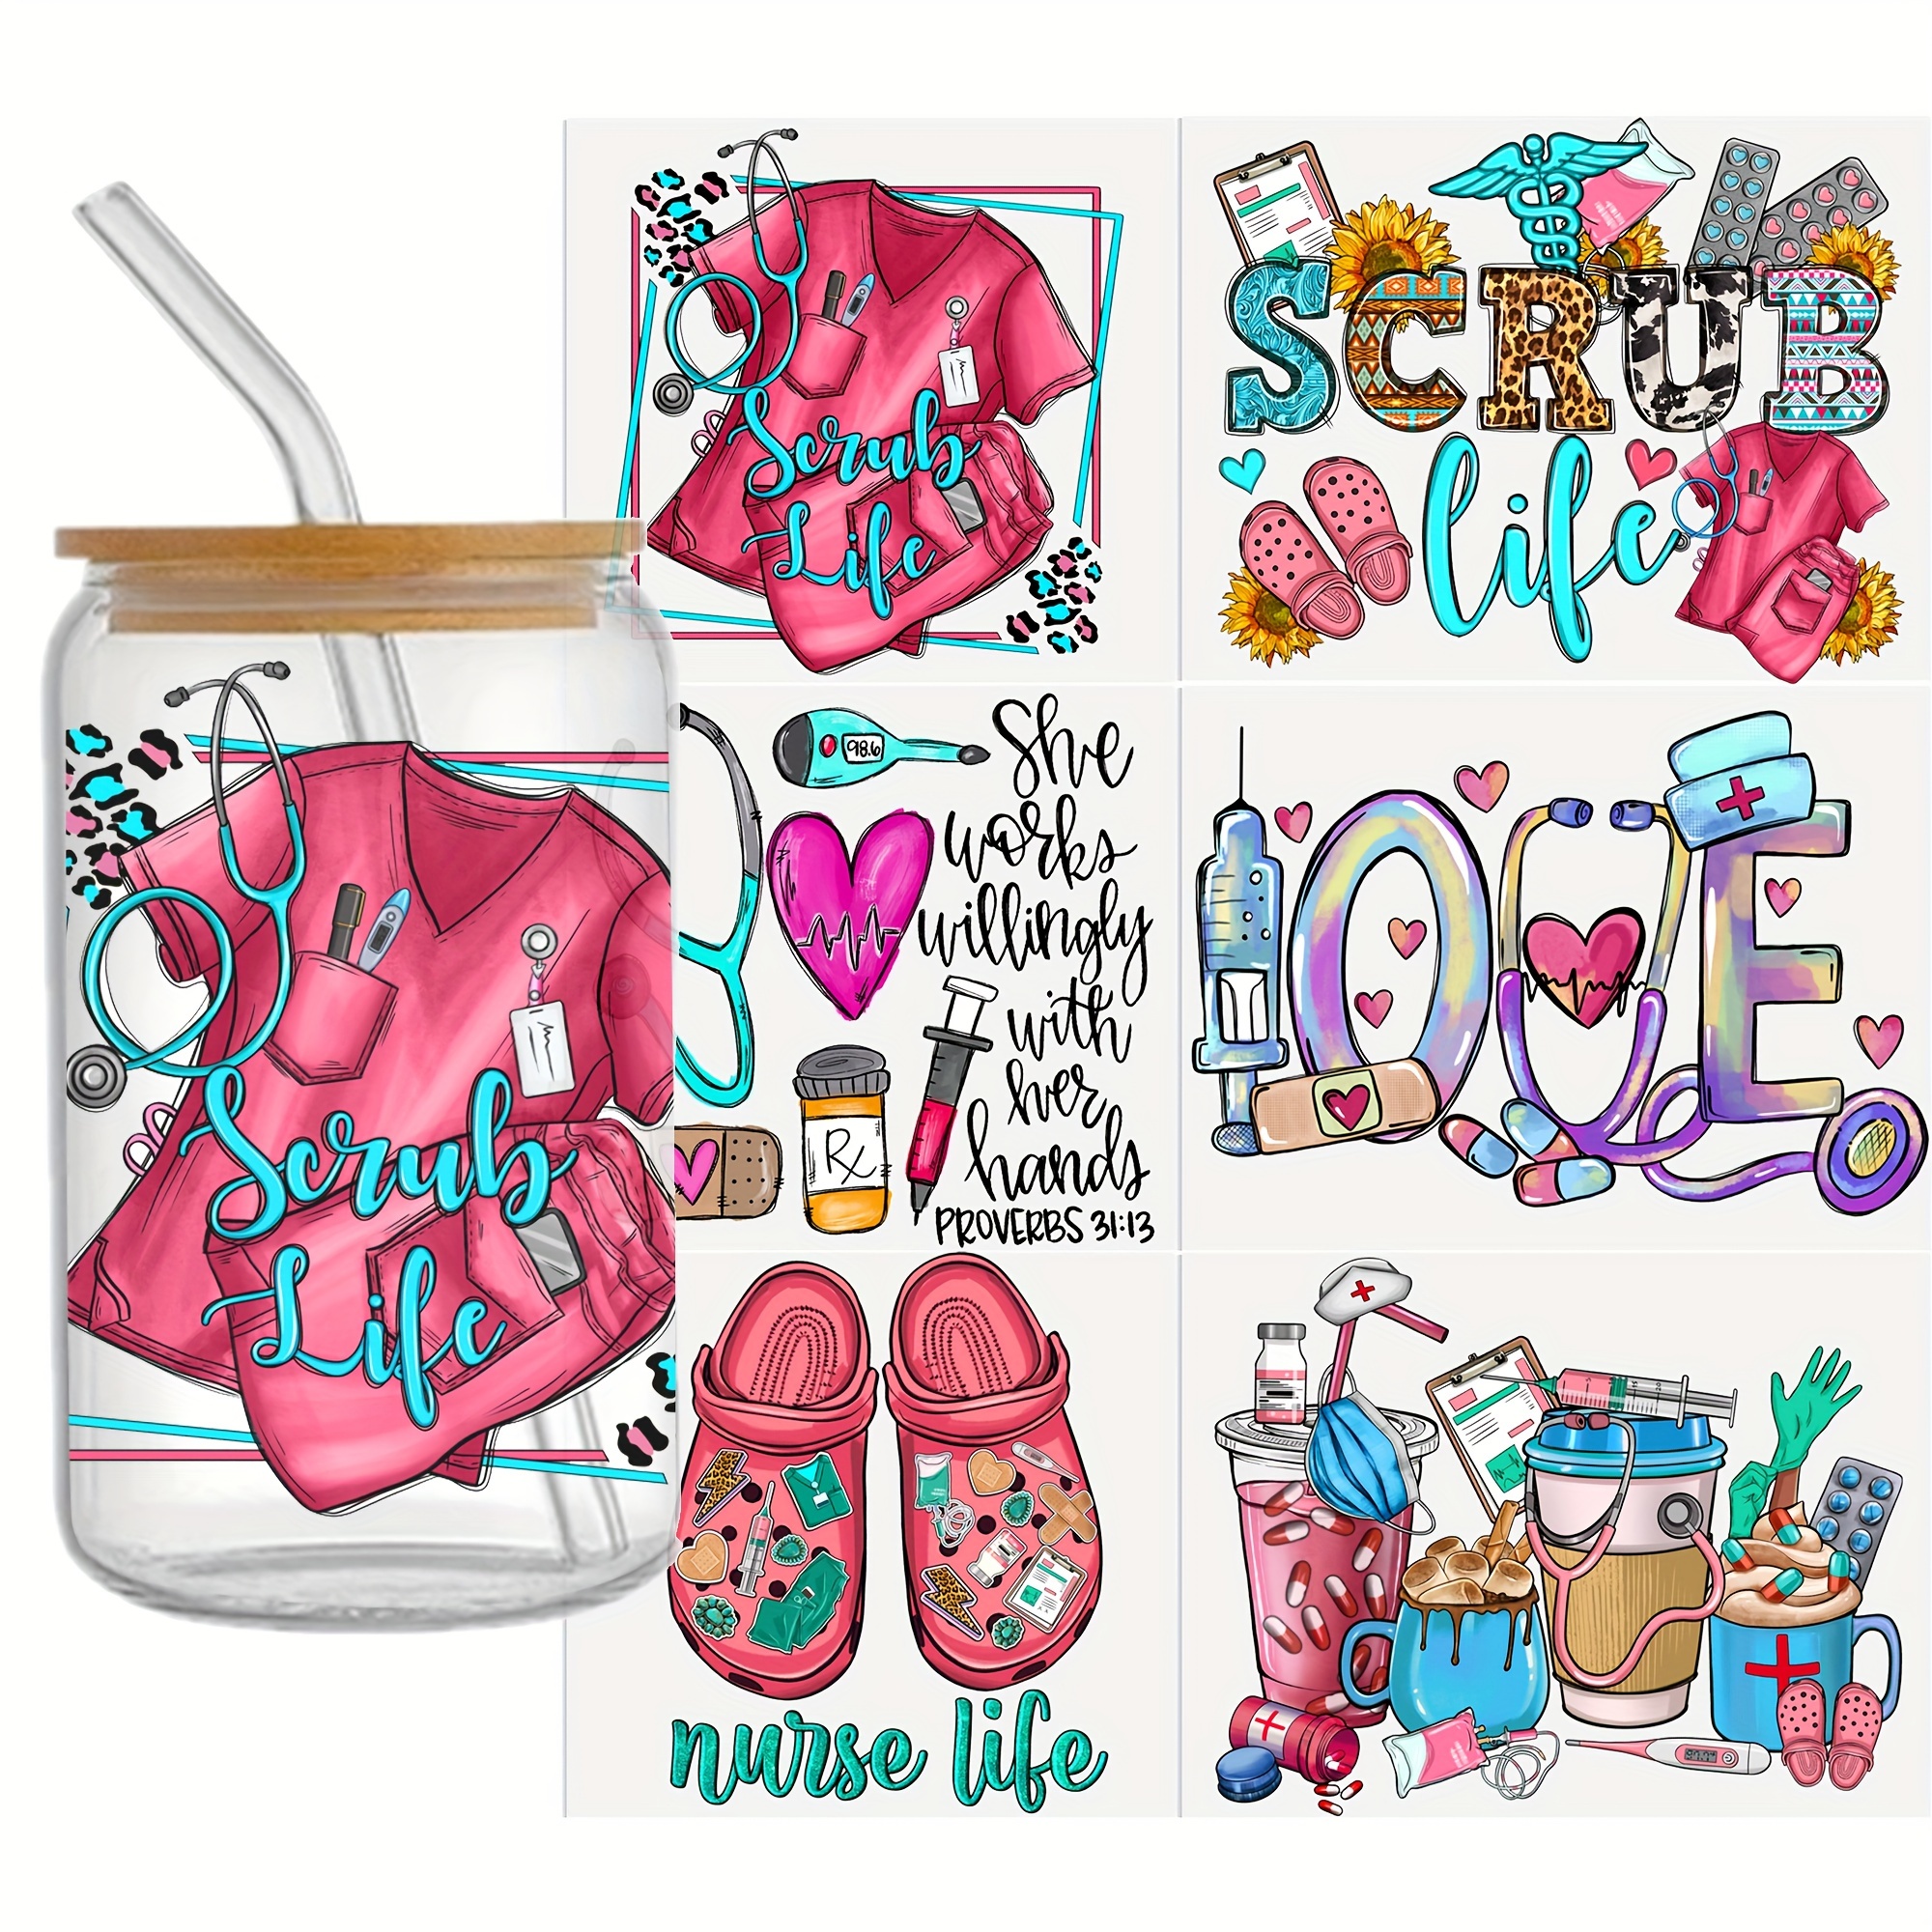 Bad Bunny print 3D UV DTF Cup Wraps Transfer Stickers Custom Wraps for 16oz  Libbey Glass Can Cold Cups Tumbler - AliExpress